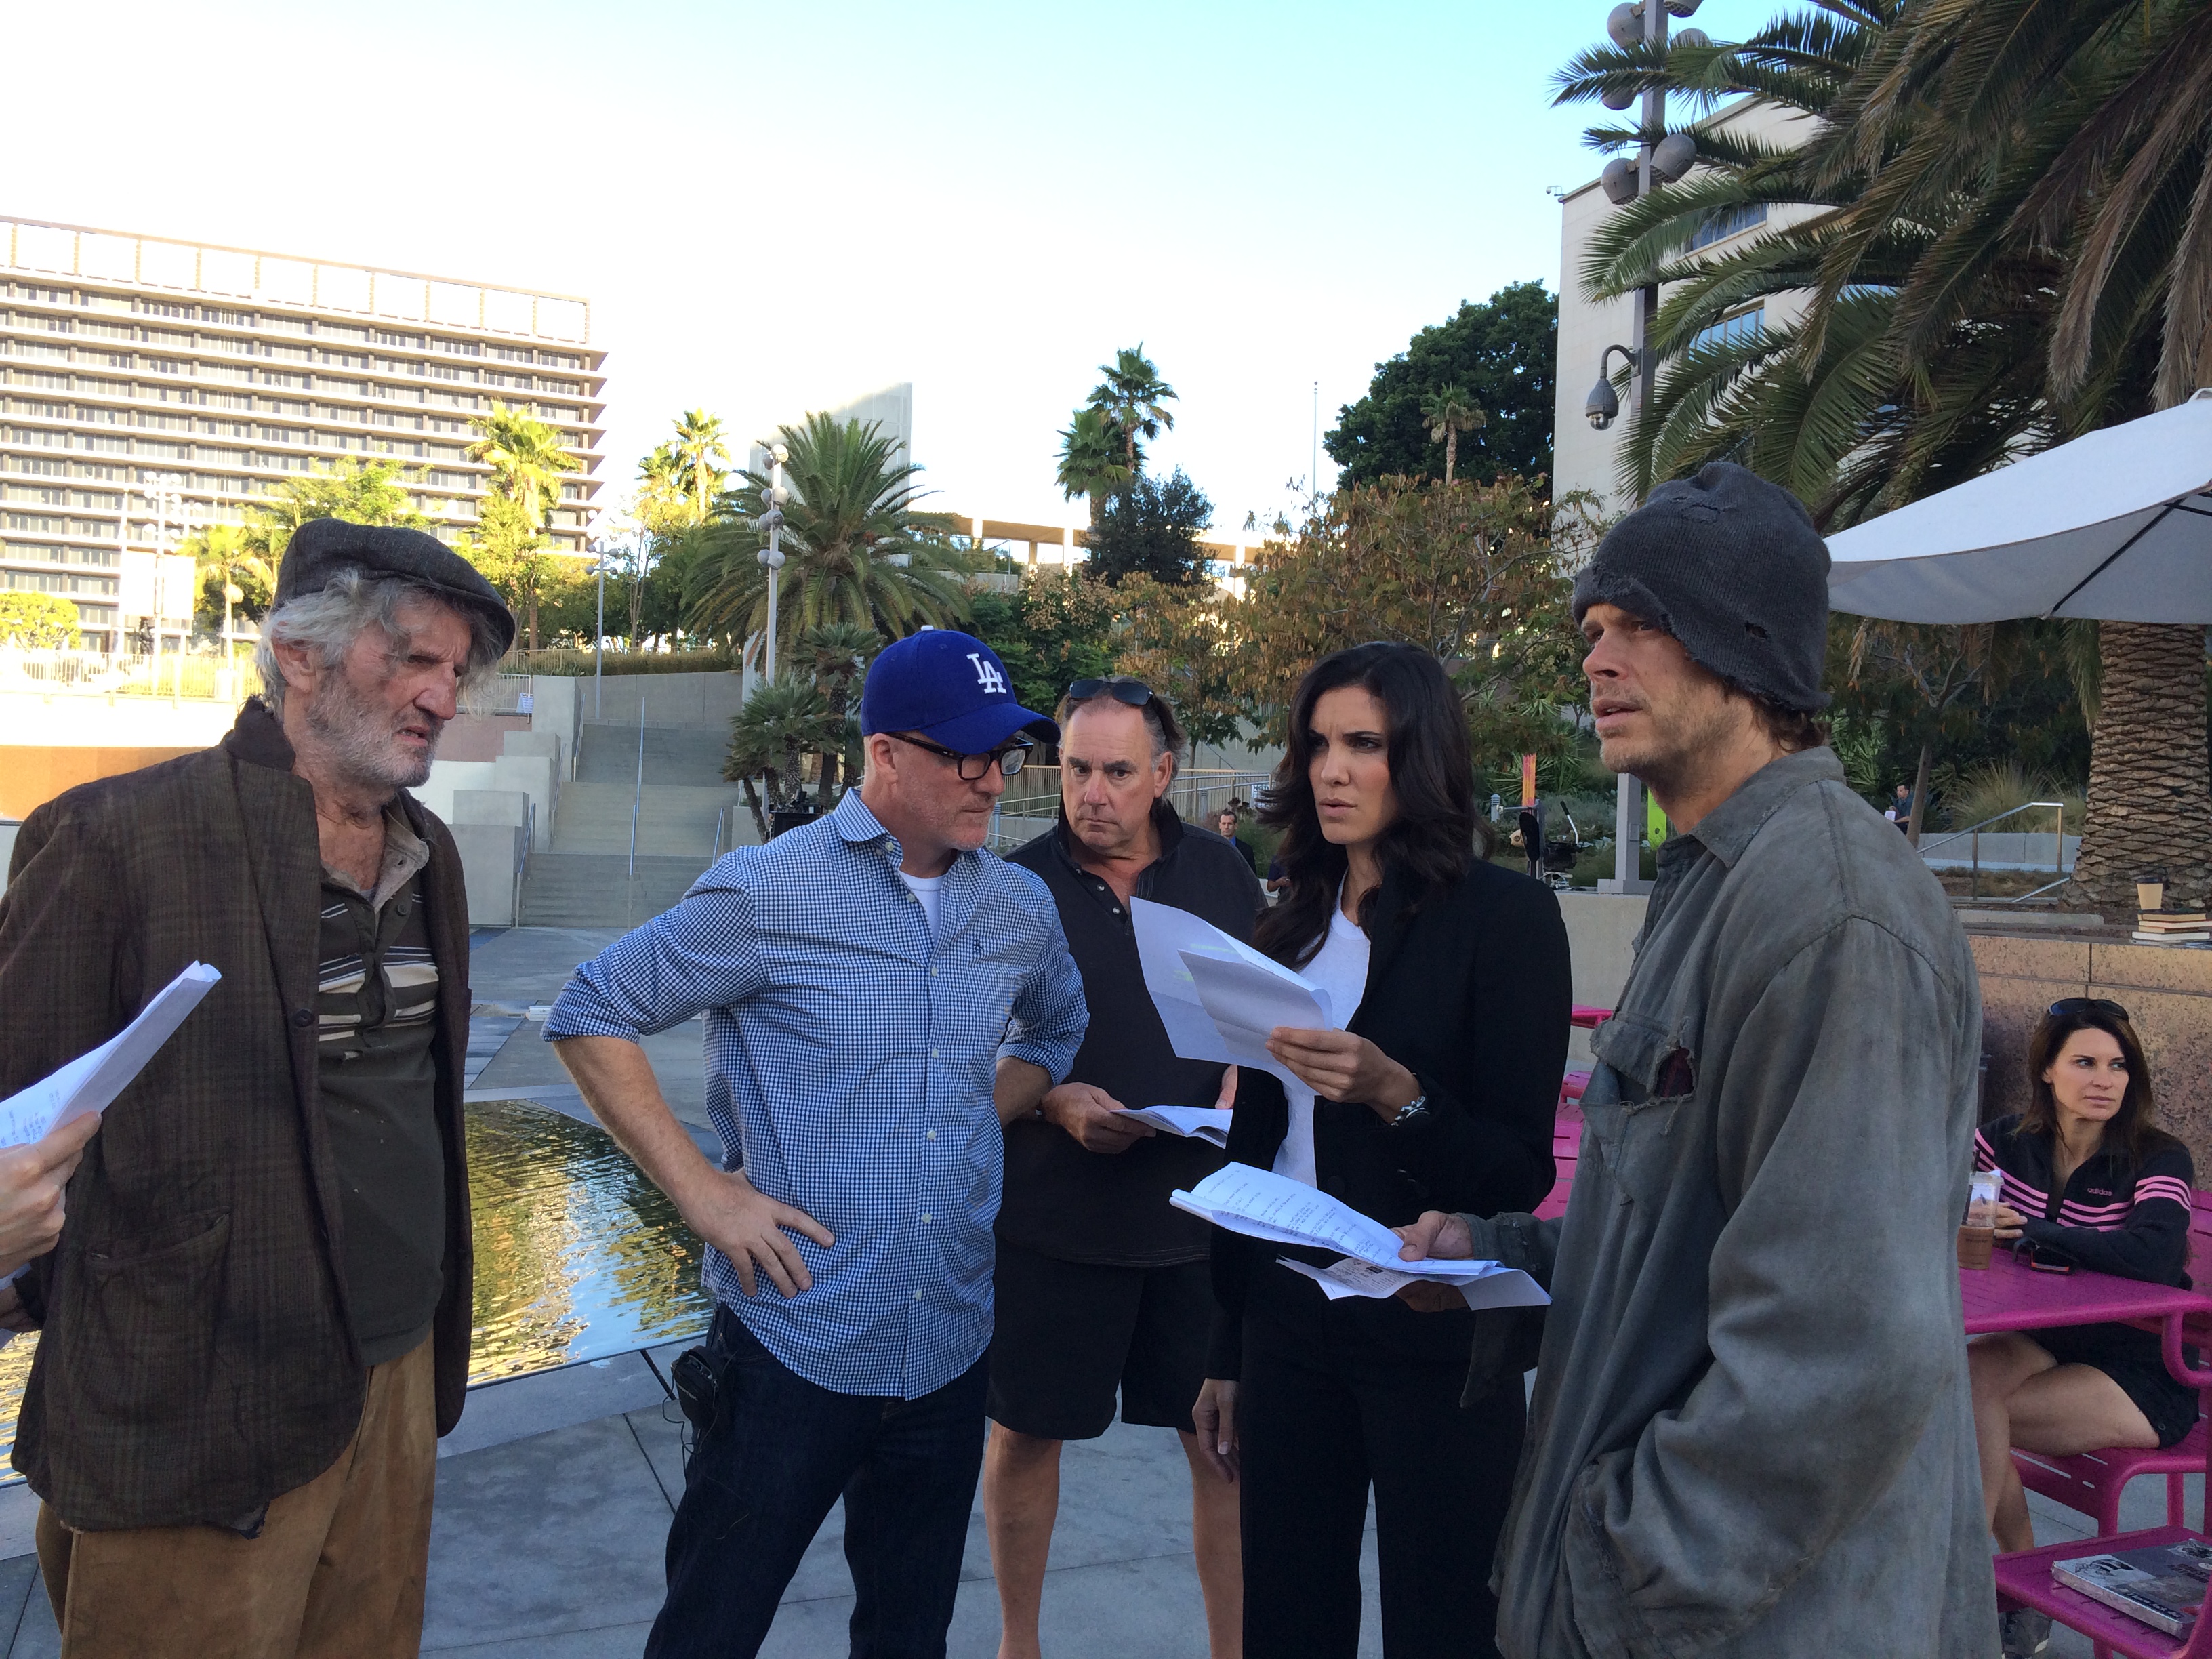 on location in Grand Park shooting NCIS LA episode 6-06 